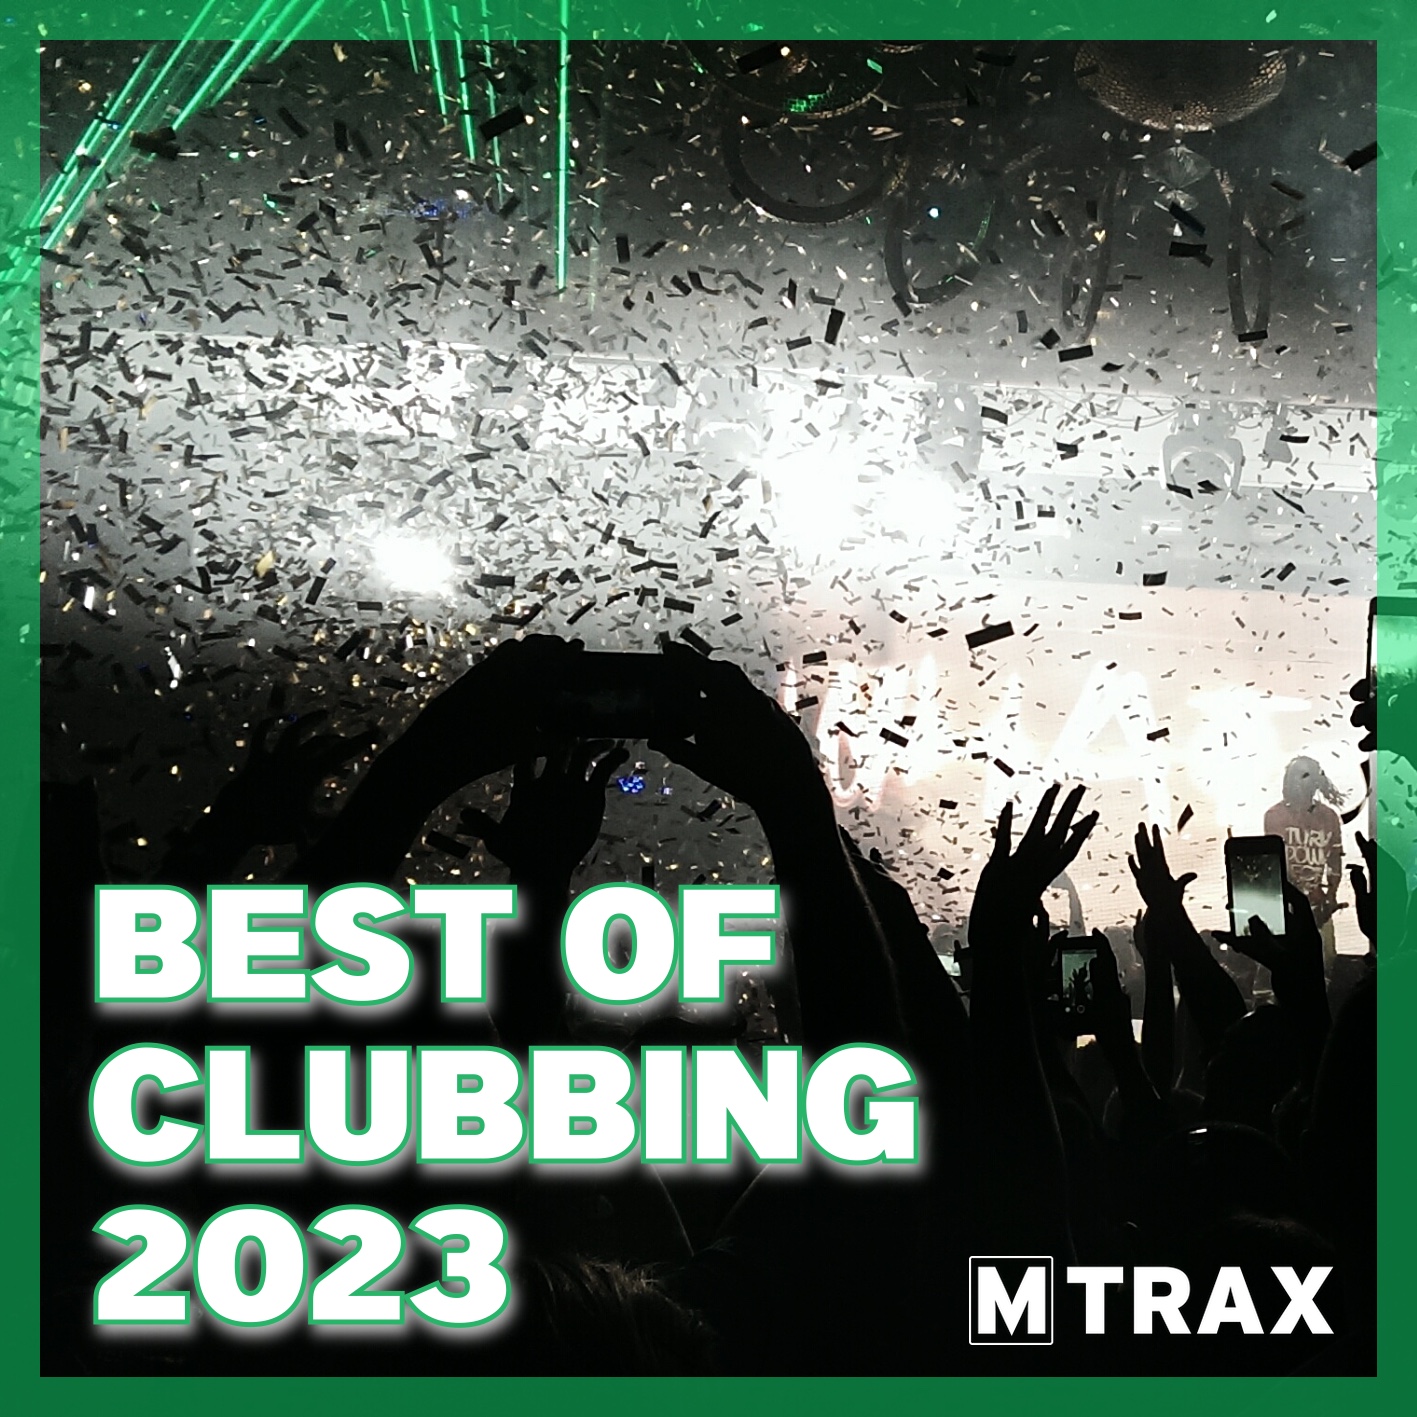 MTRAX Best of Clubbing 2023